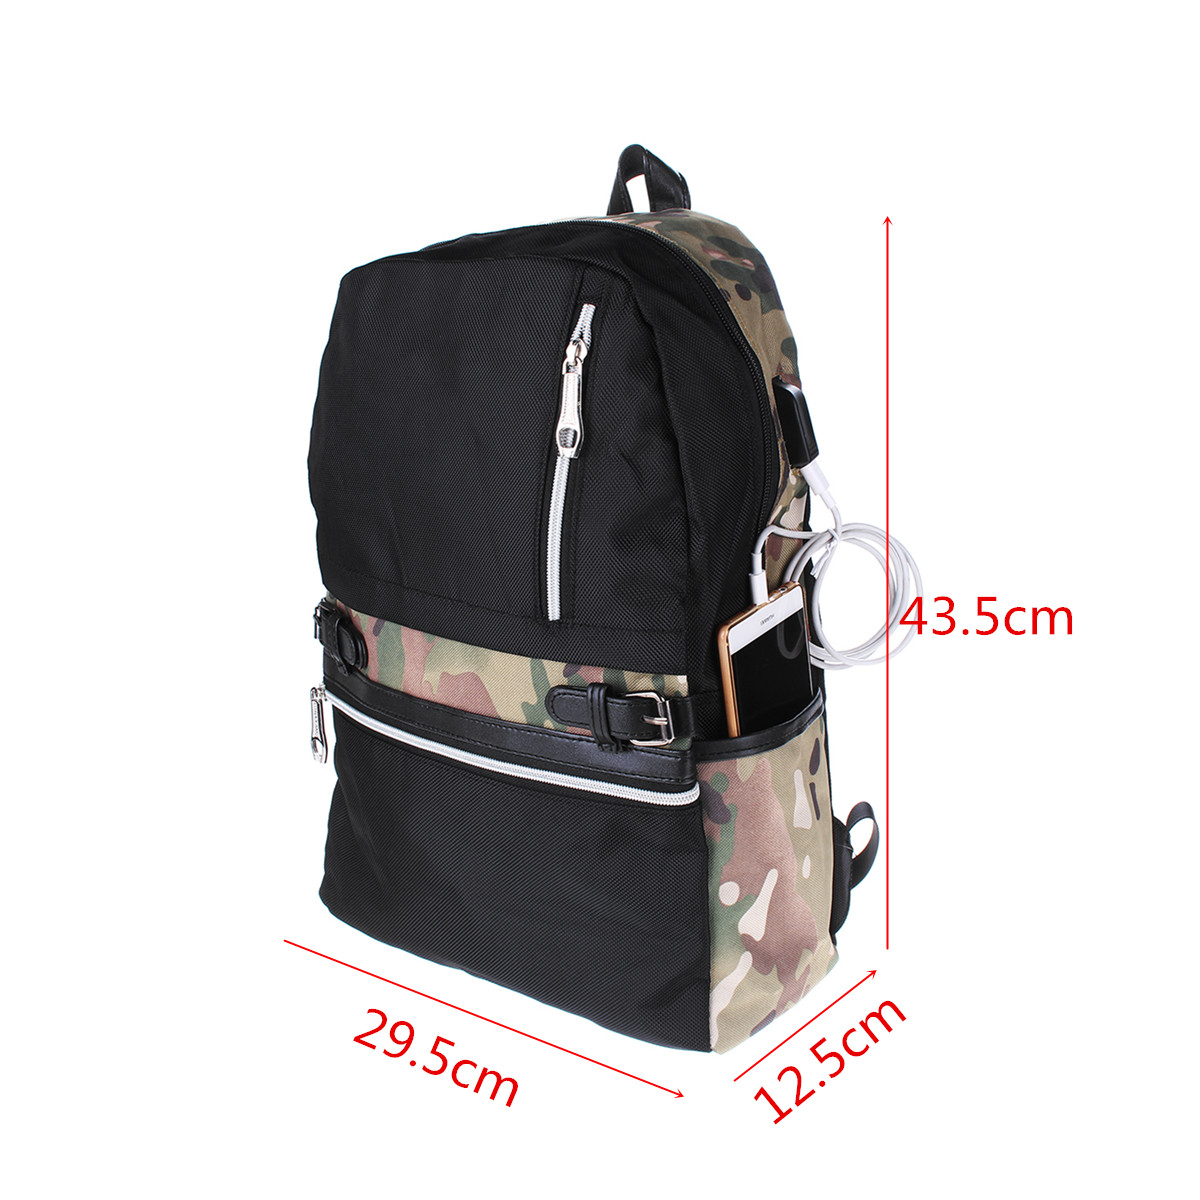 295x125x435cm-Anti-Theft-Waterproof-Backpack-With-USB-Charging-Port-Outdoor-Travel-Fishing-Bag-1287206-3